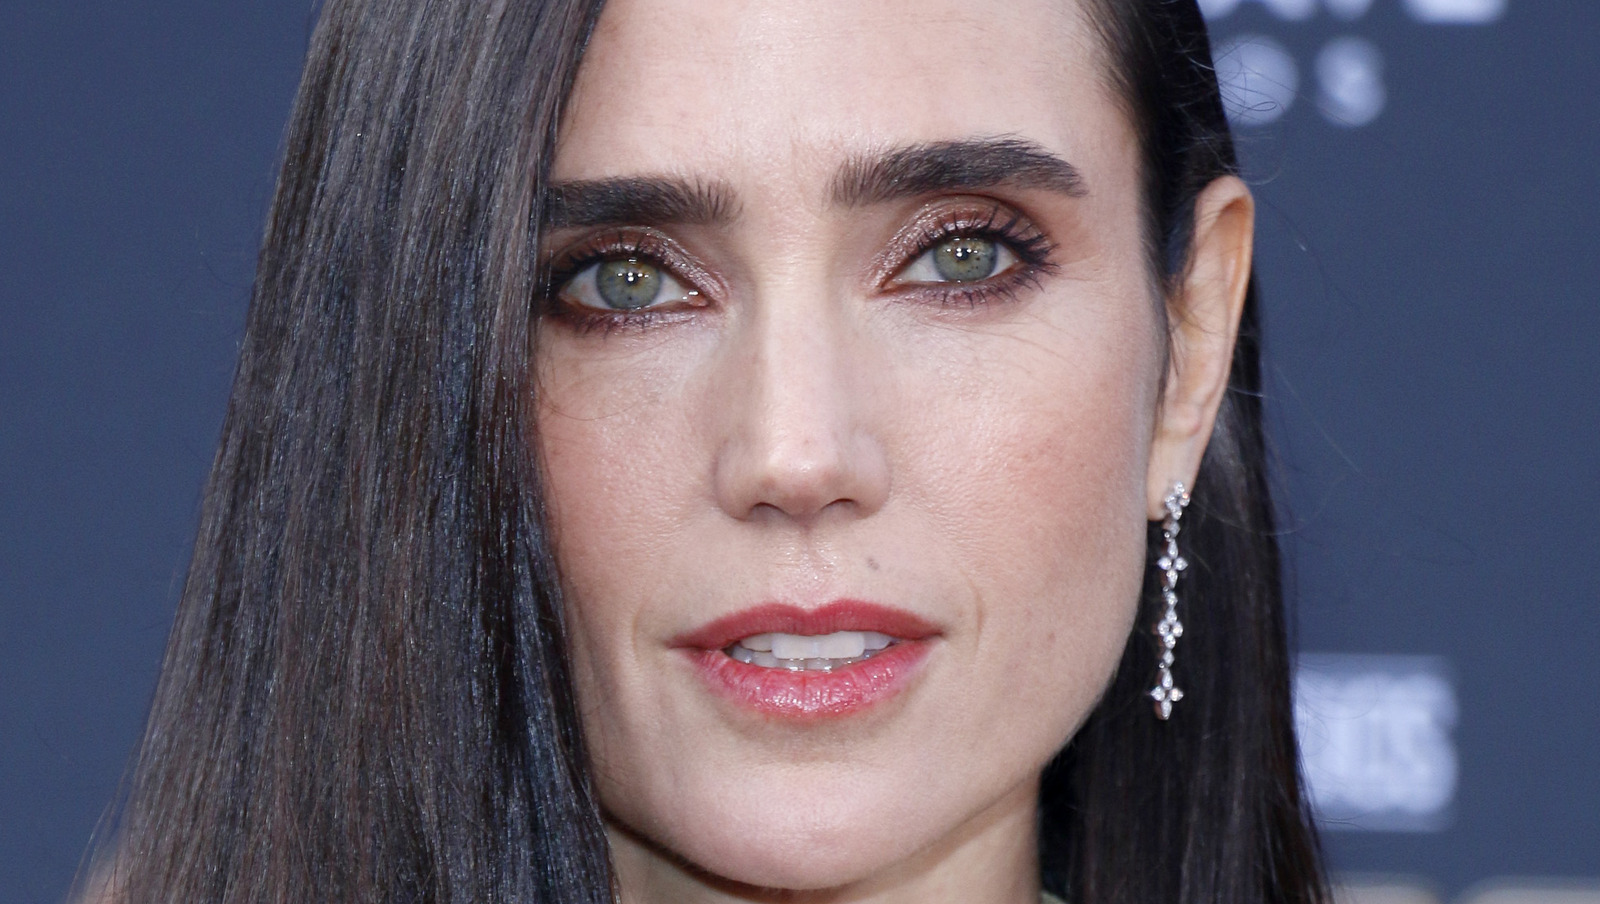 Why Jennifer Connelly Thinks Her Looks Held Back Her Career